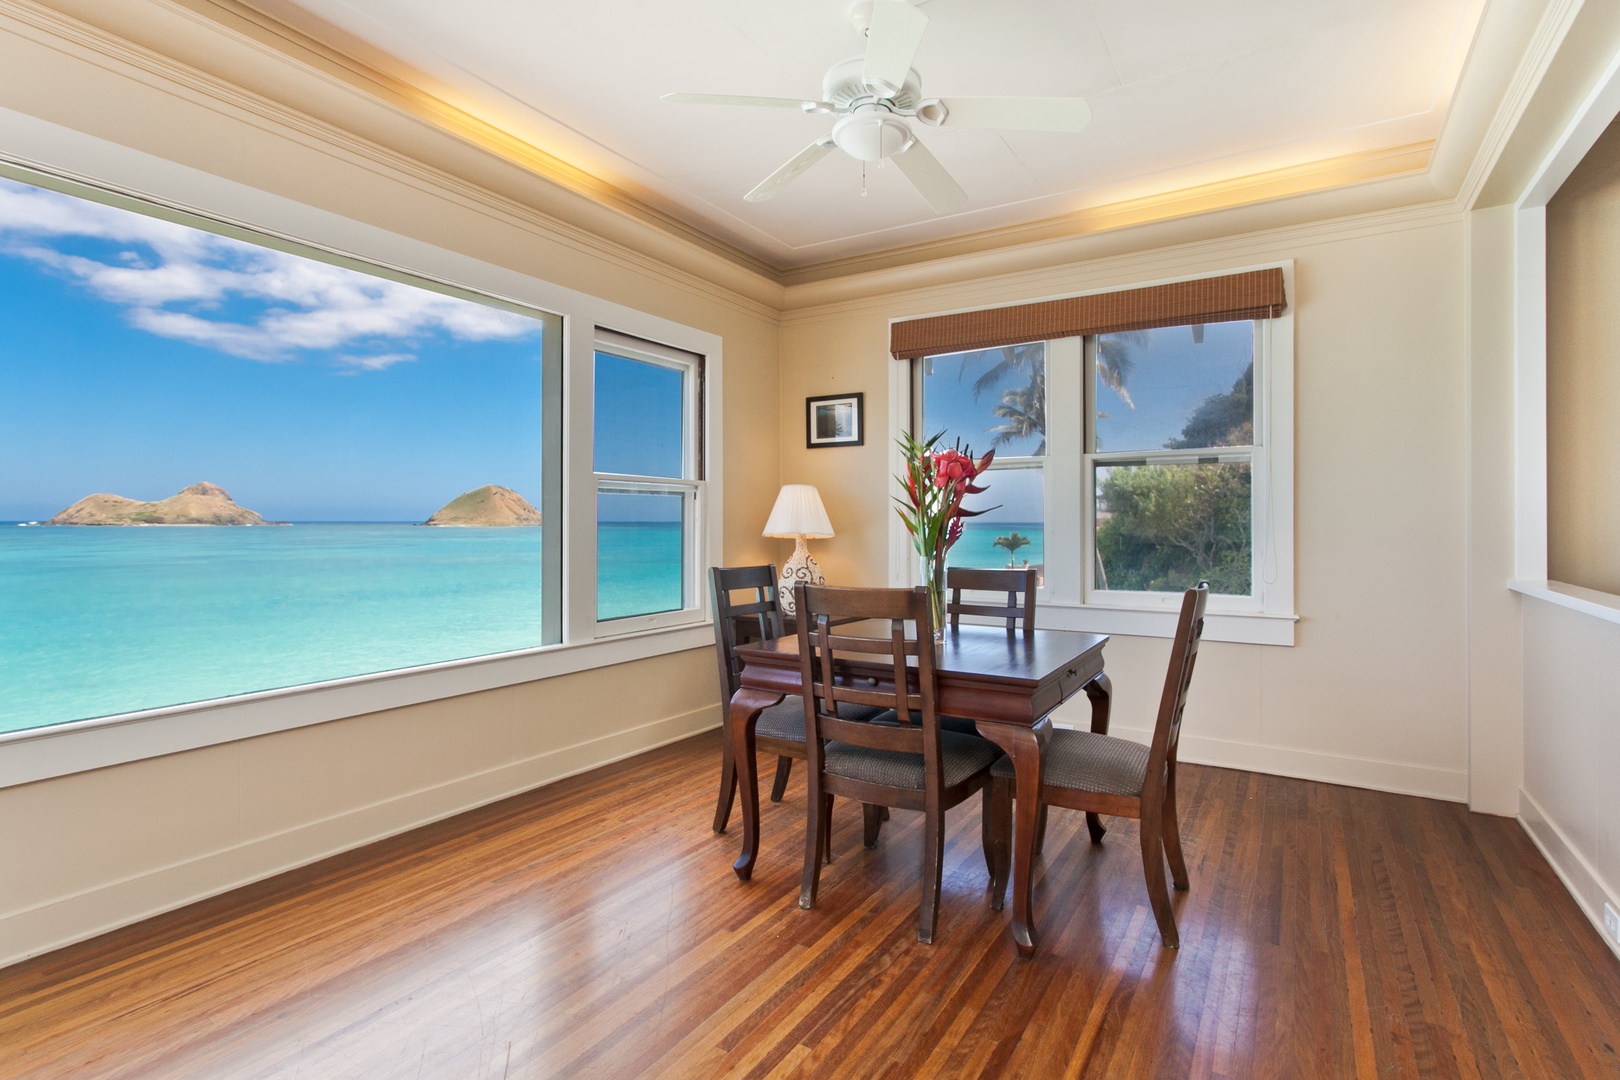 Kailua Vacation Rentals, Hale Mahina Lanikai* - The breakfast nook is a perfect spot for morning coffee or a light meal.